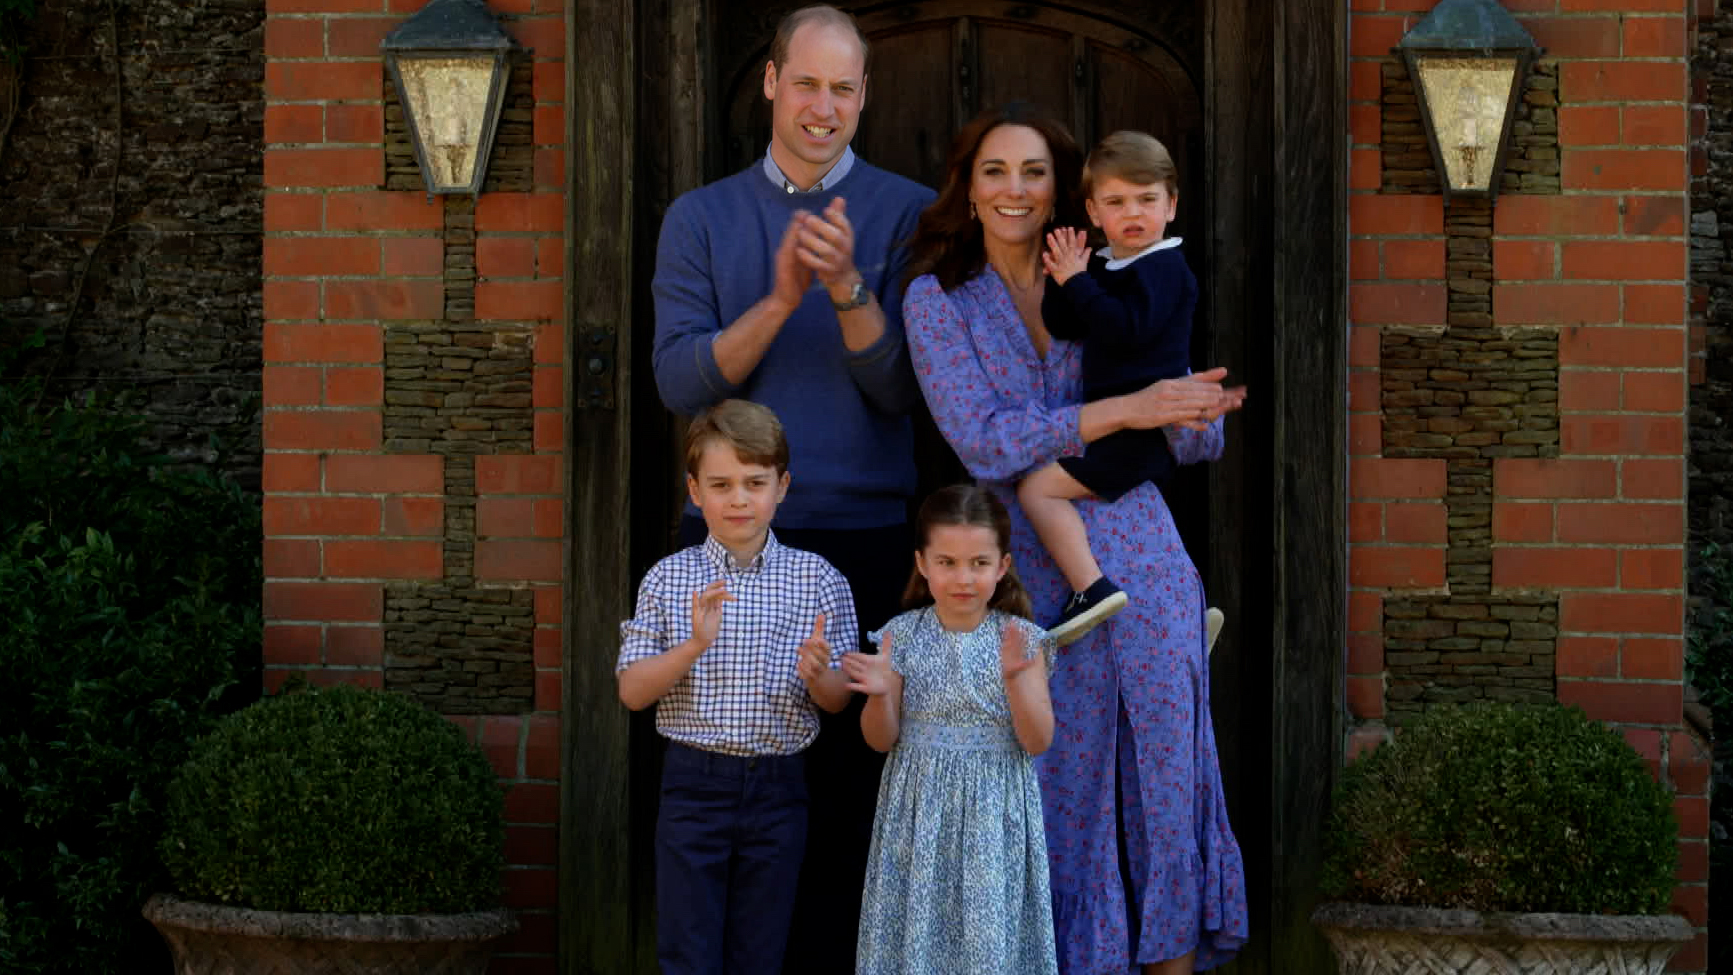 Prince George, Prince William, Princess Charlotte, Kate Middleton and Prince Louis clap for NHS carers on April 23, 2020 in London, England. | Source: Getty Images